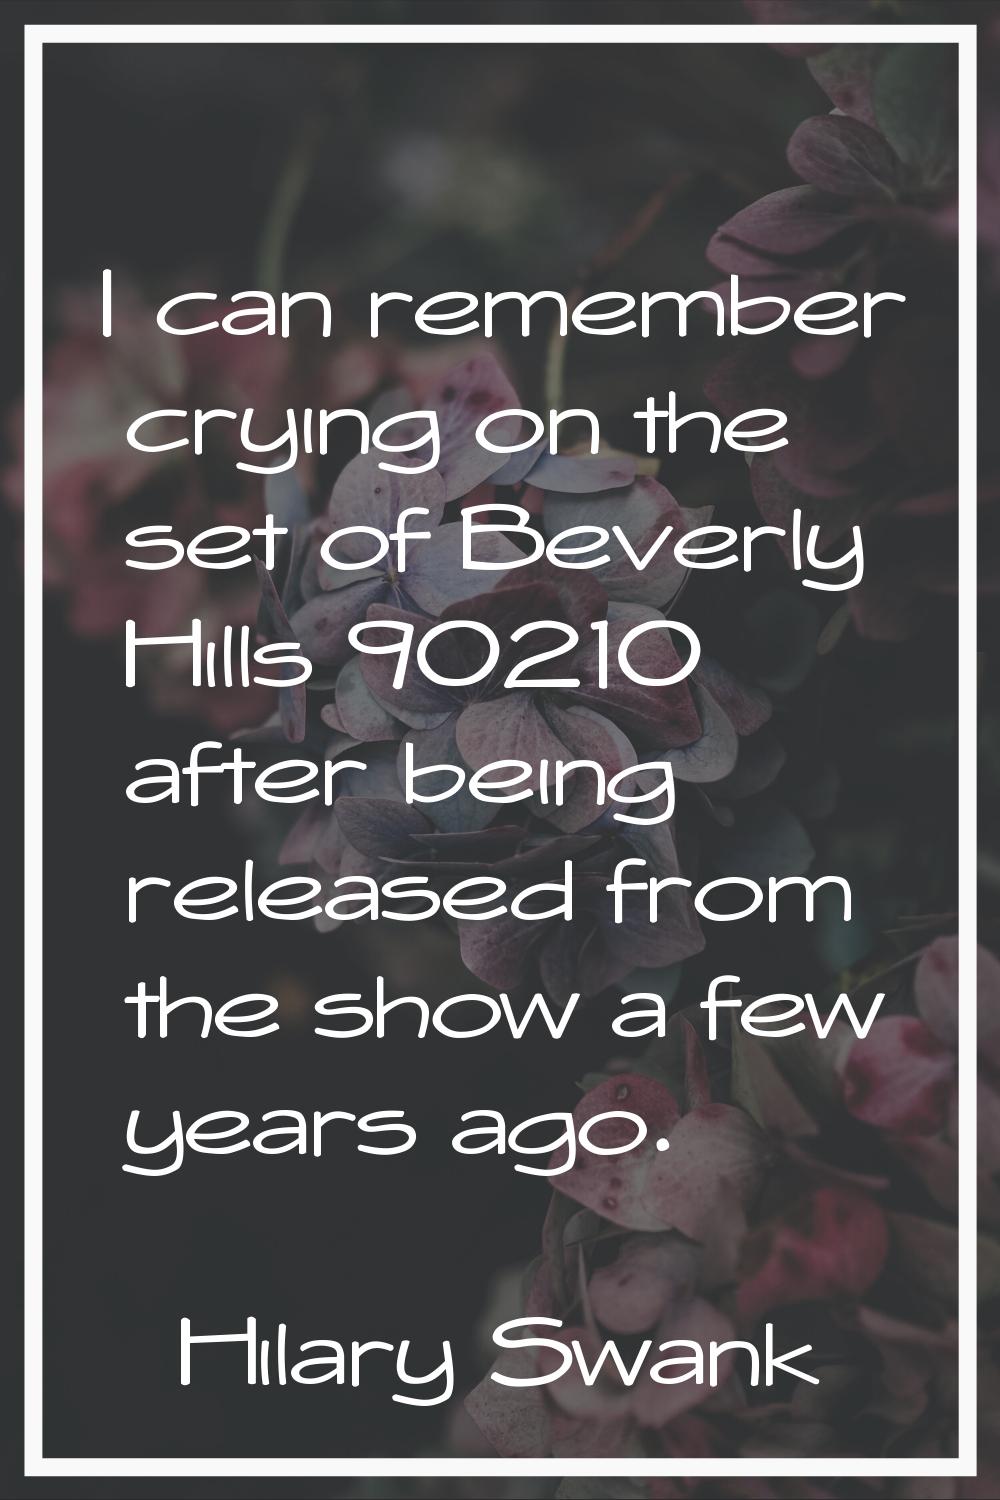 I can remember crying on the set of Beverly Hills 90210 after being released from the show a few ye